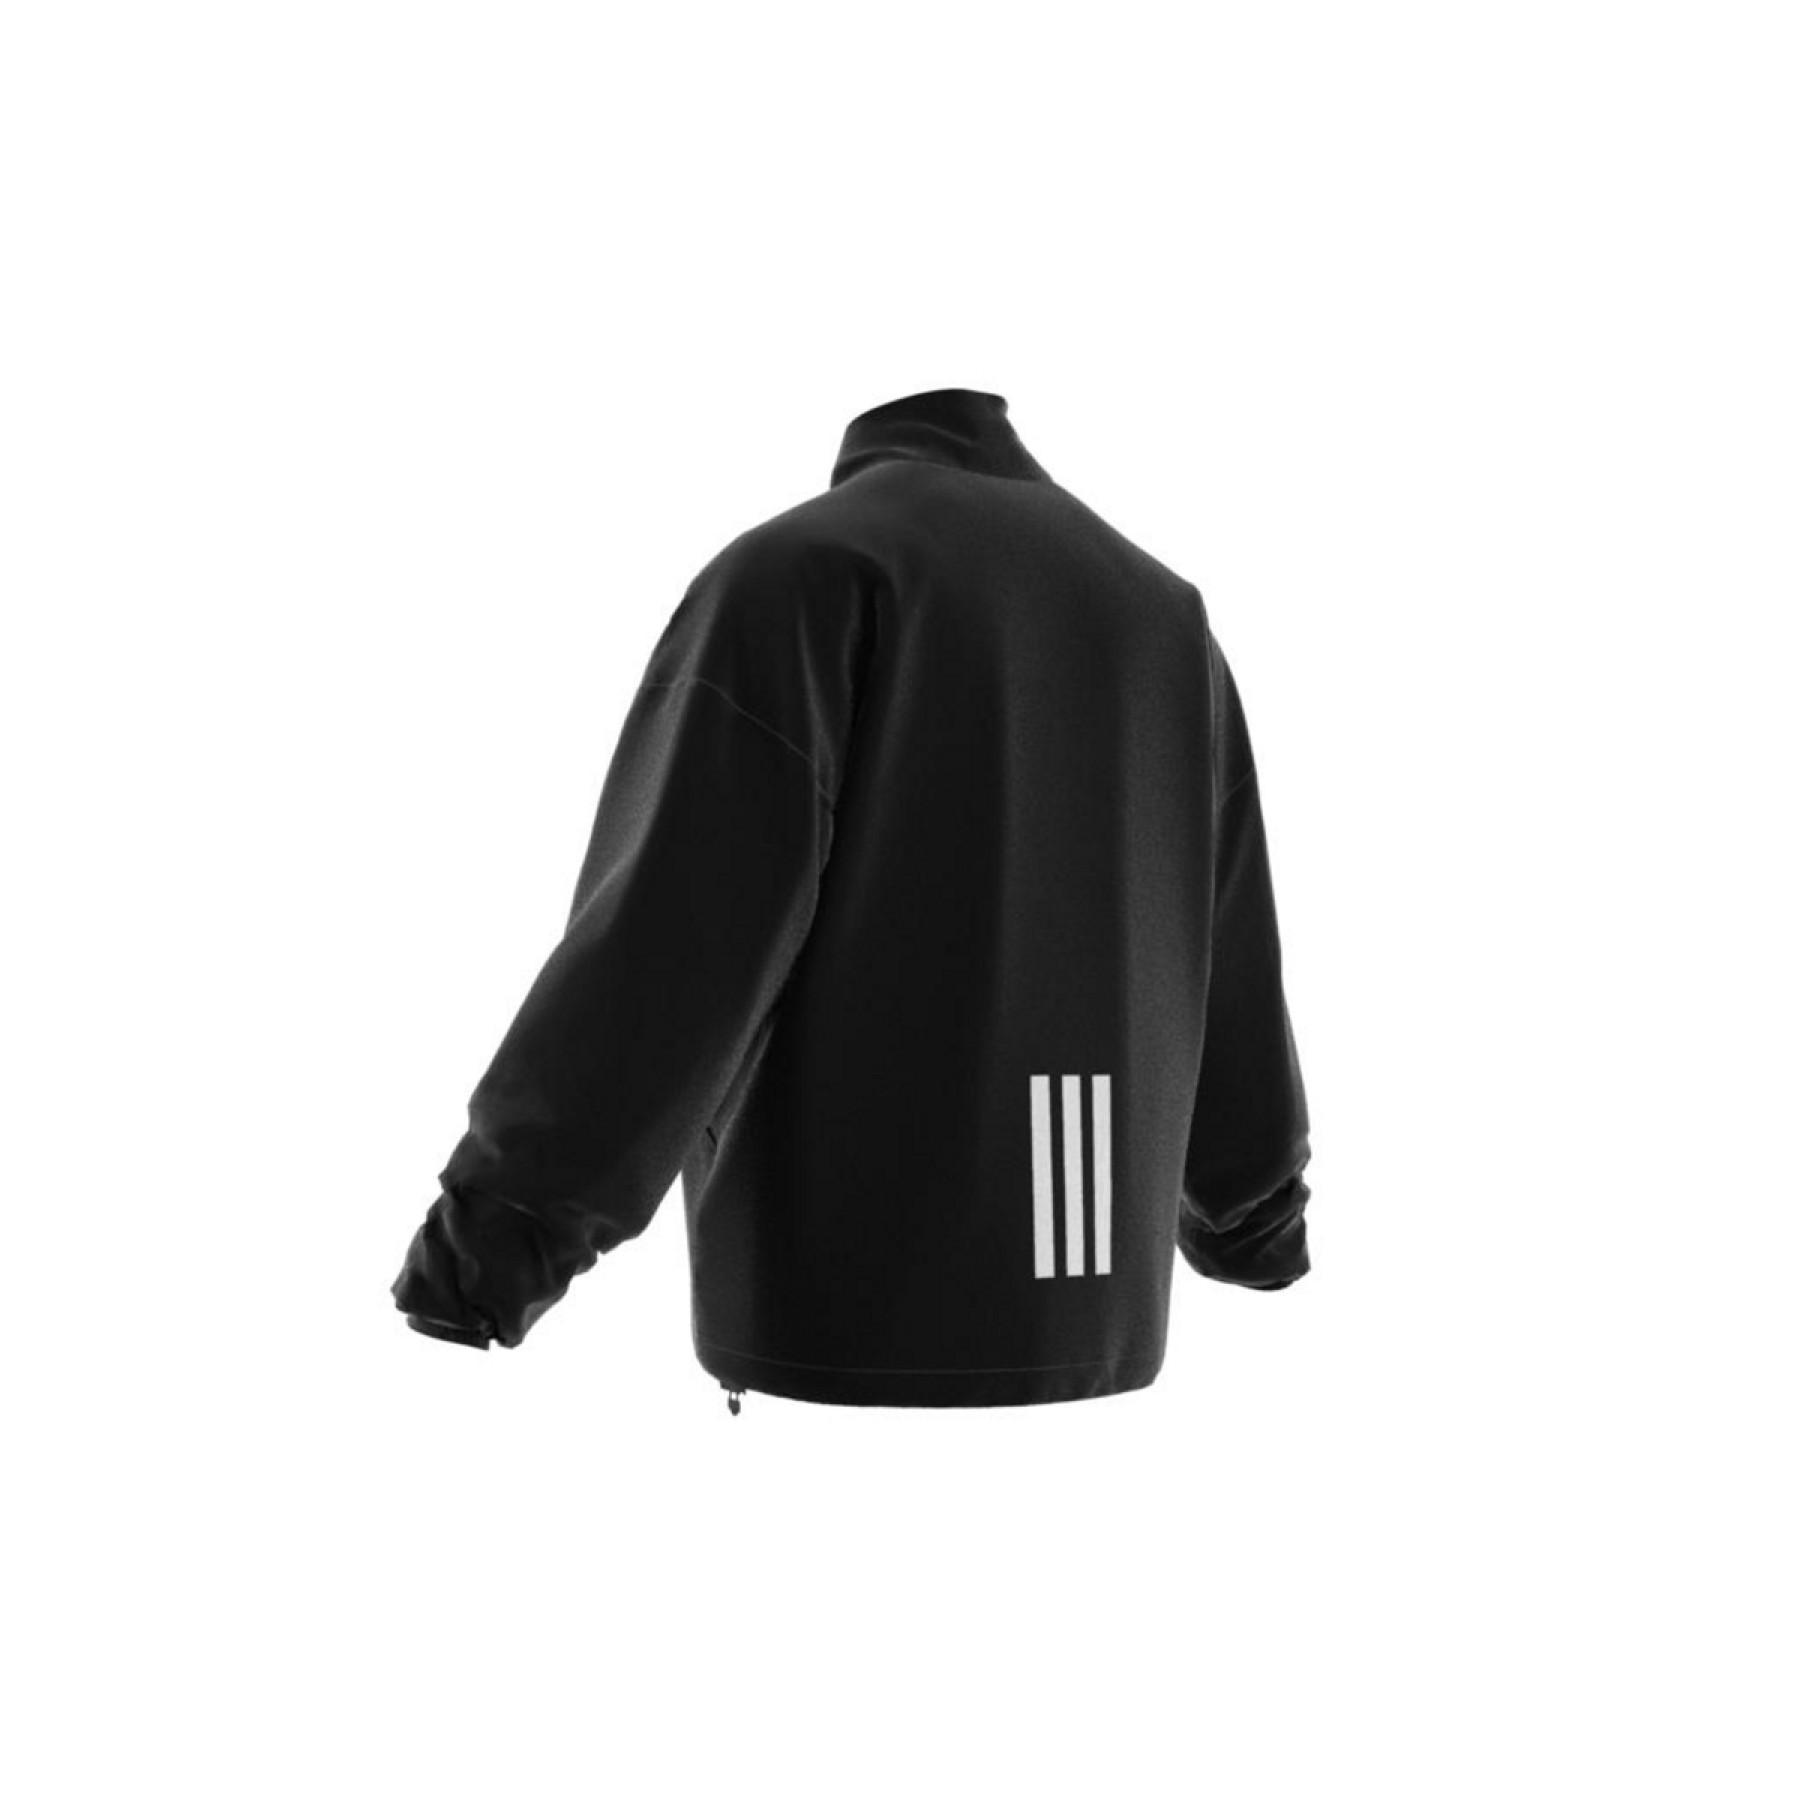 Jacket adidas Back To Sport Light Insulated